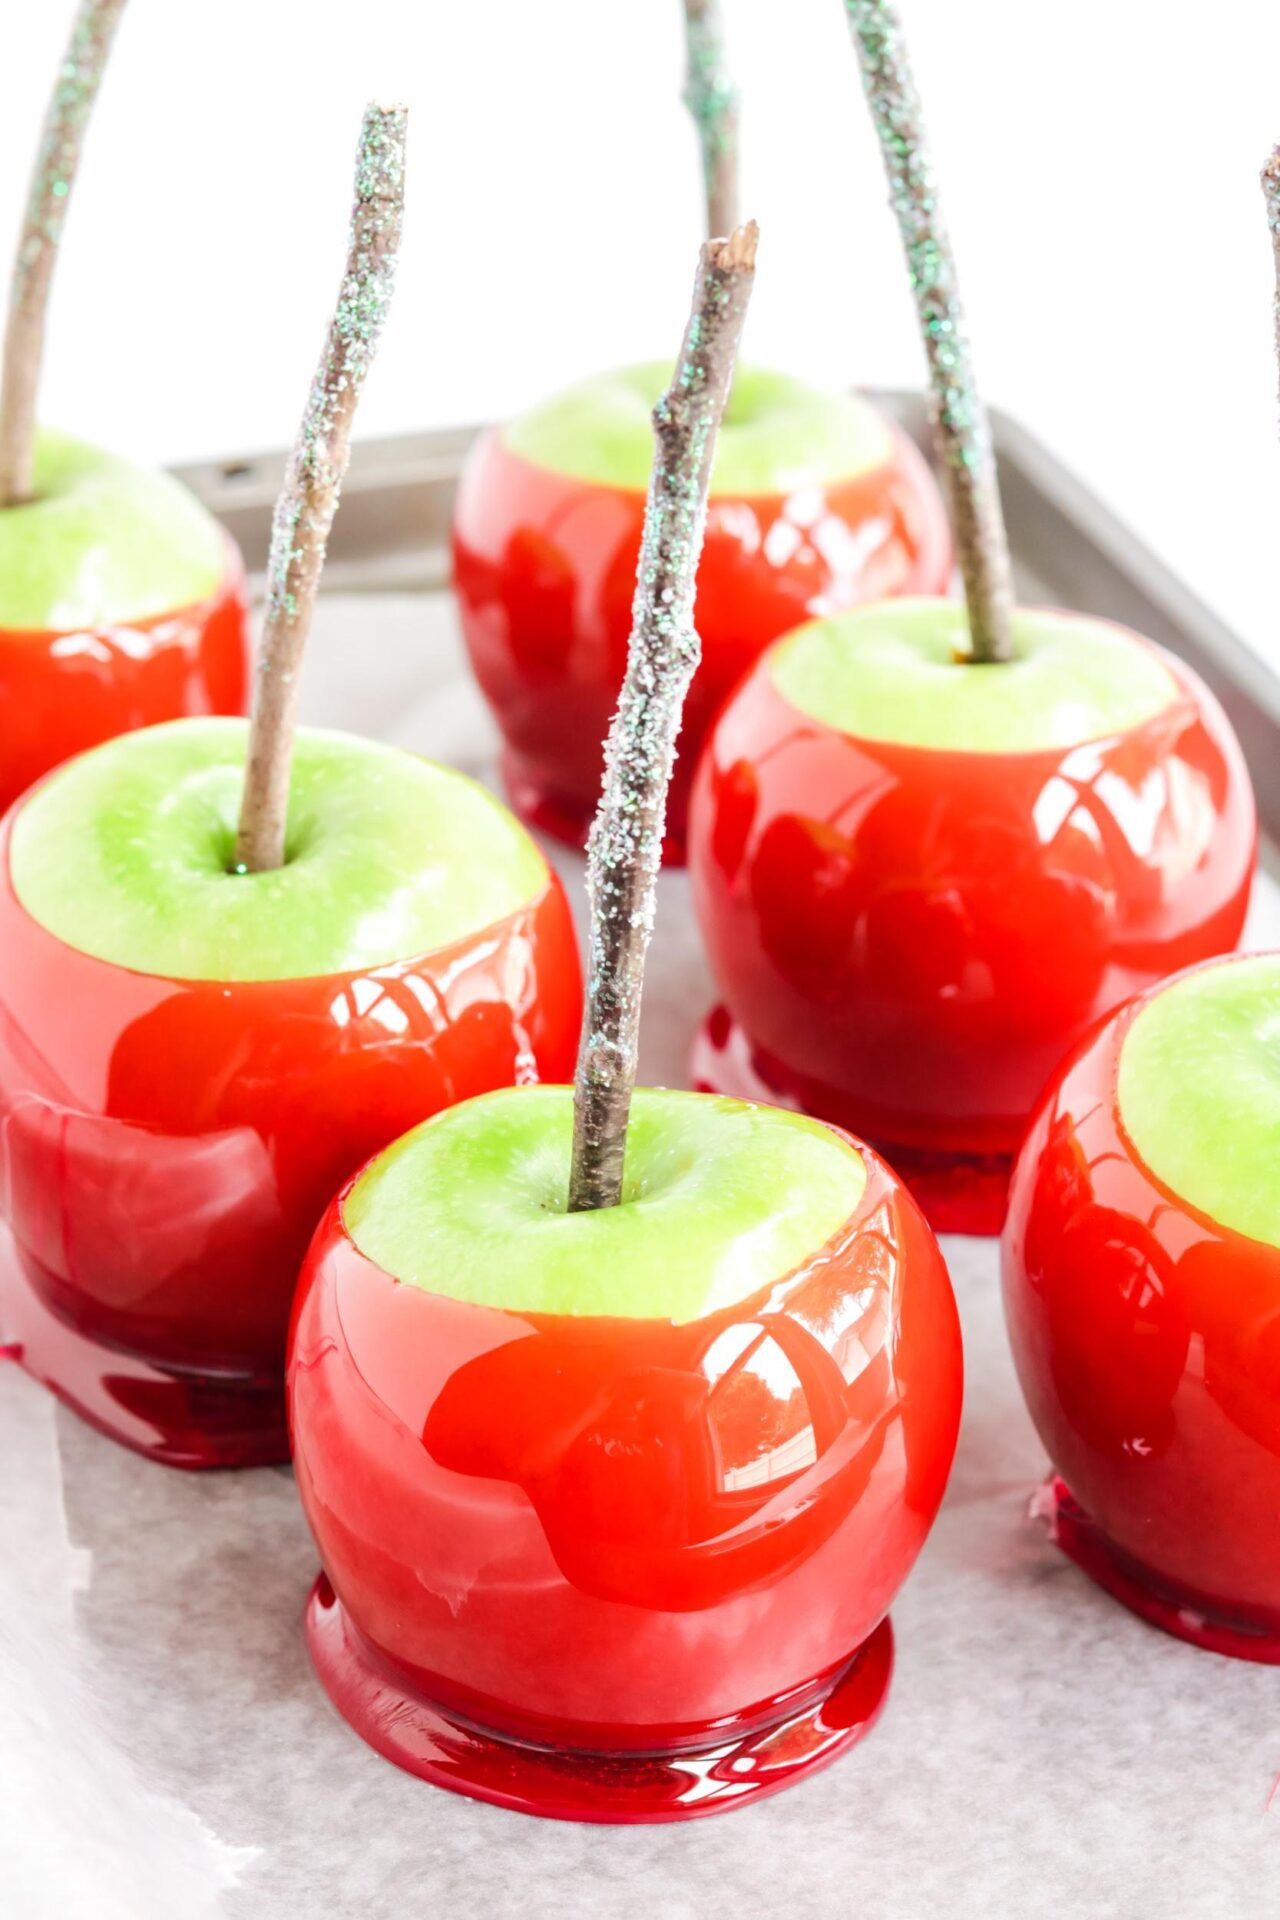 6 red candy apples on cookie sheet